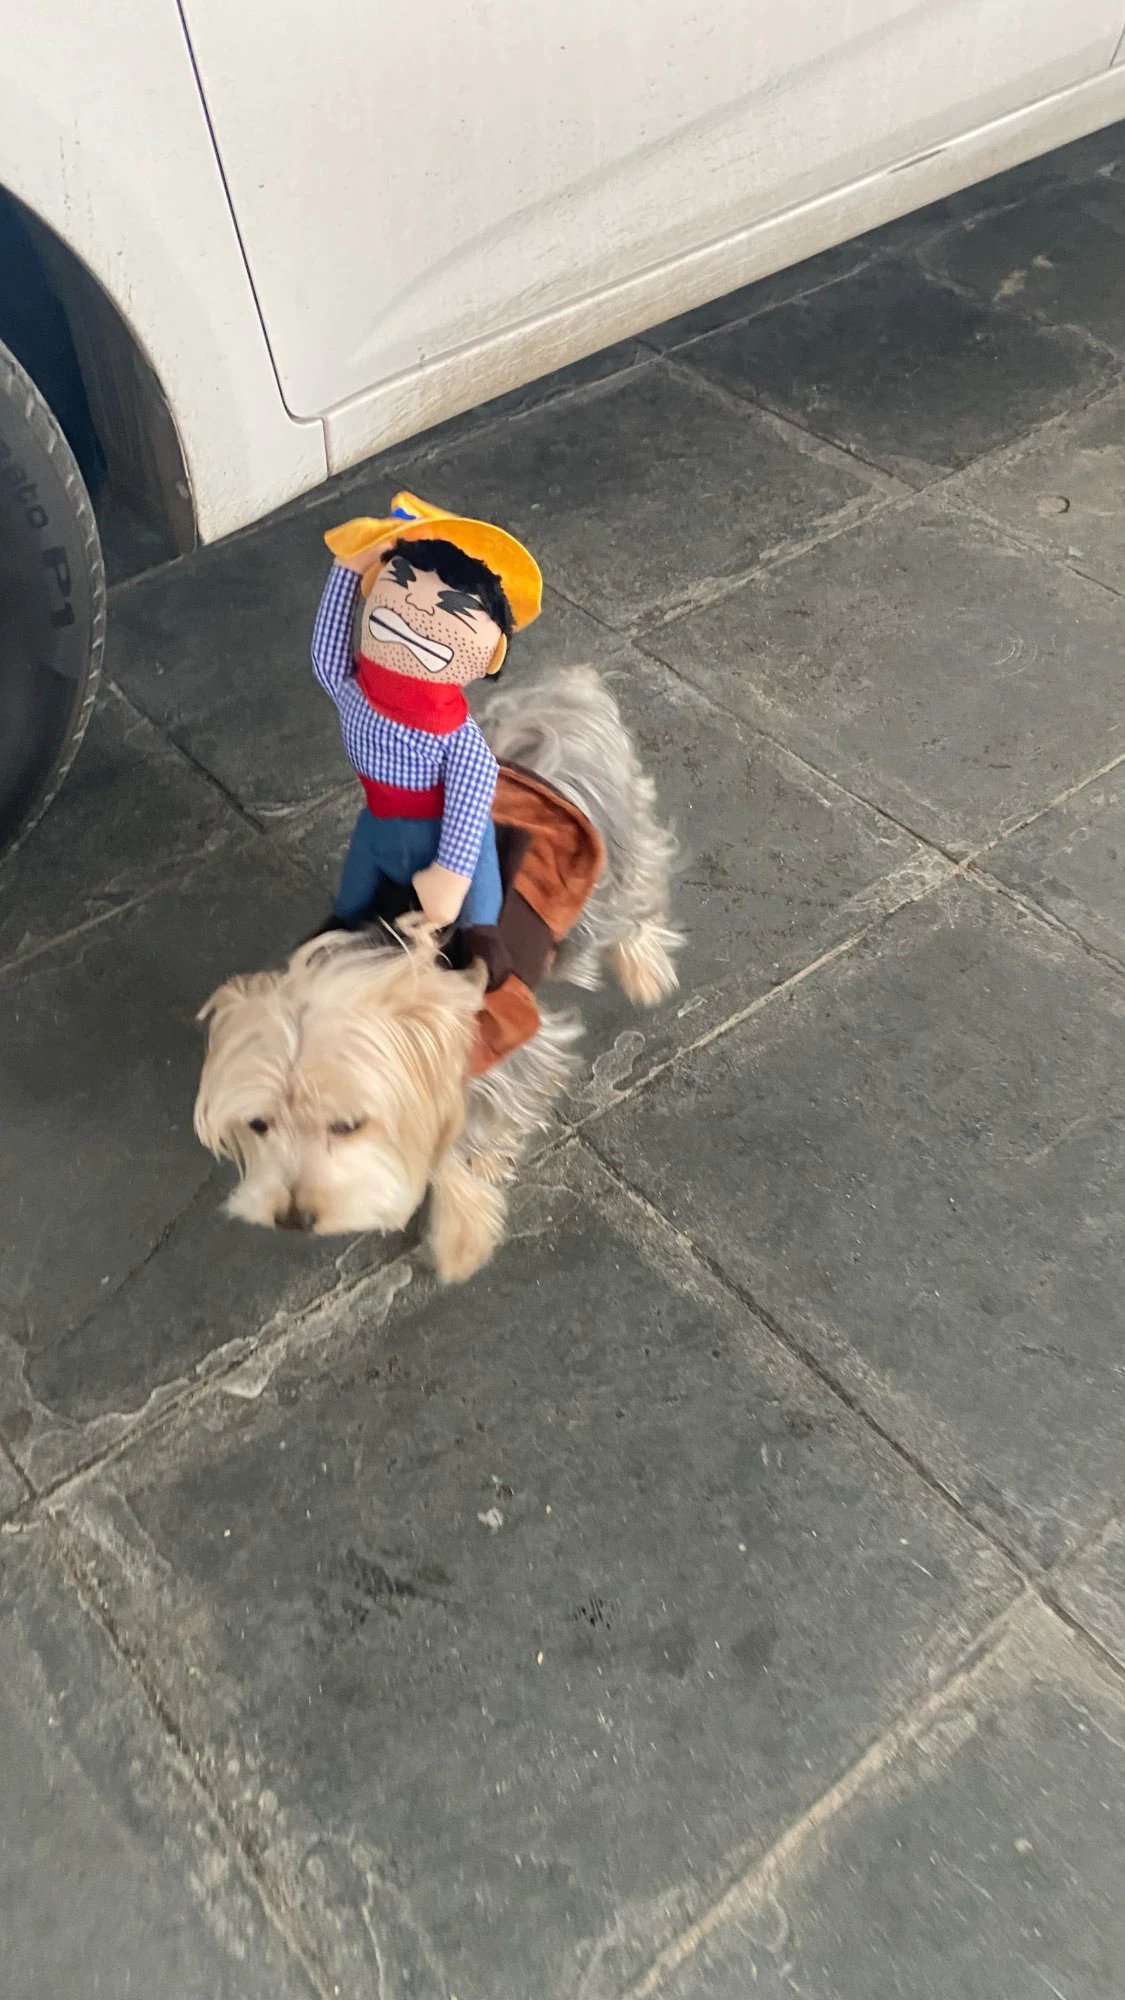 Cowboy Rider Dog Costume for Dogs